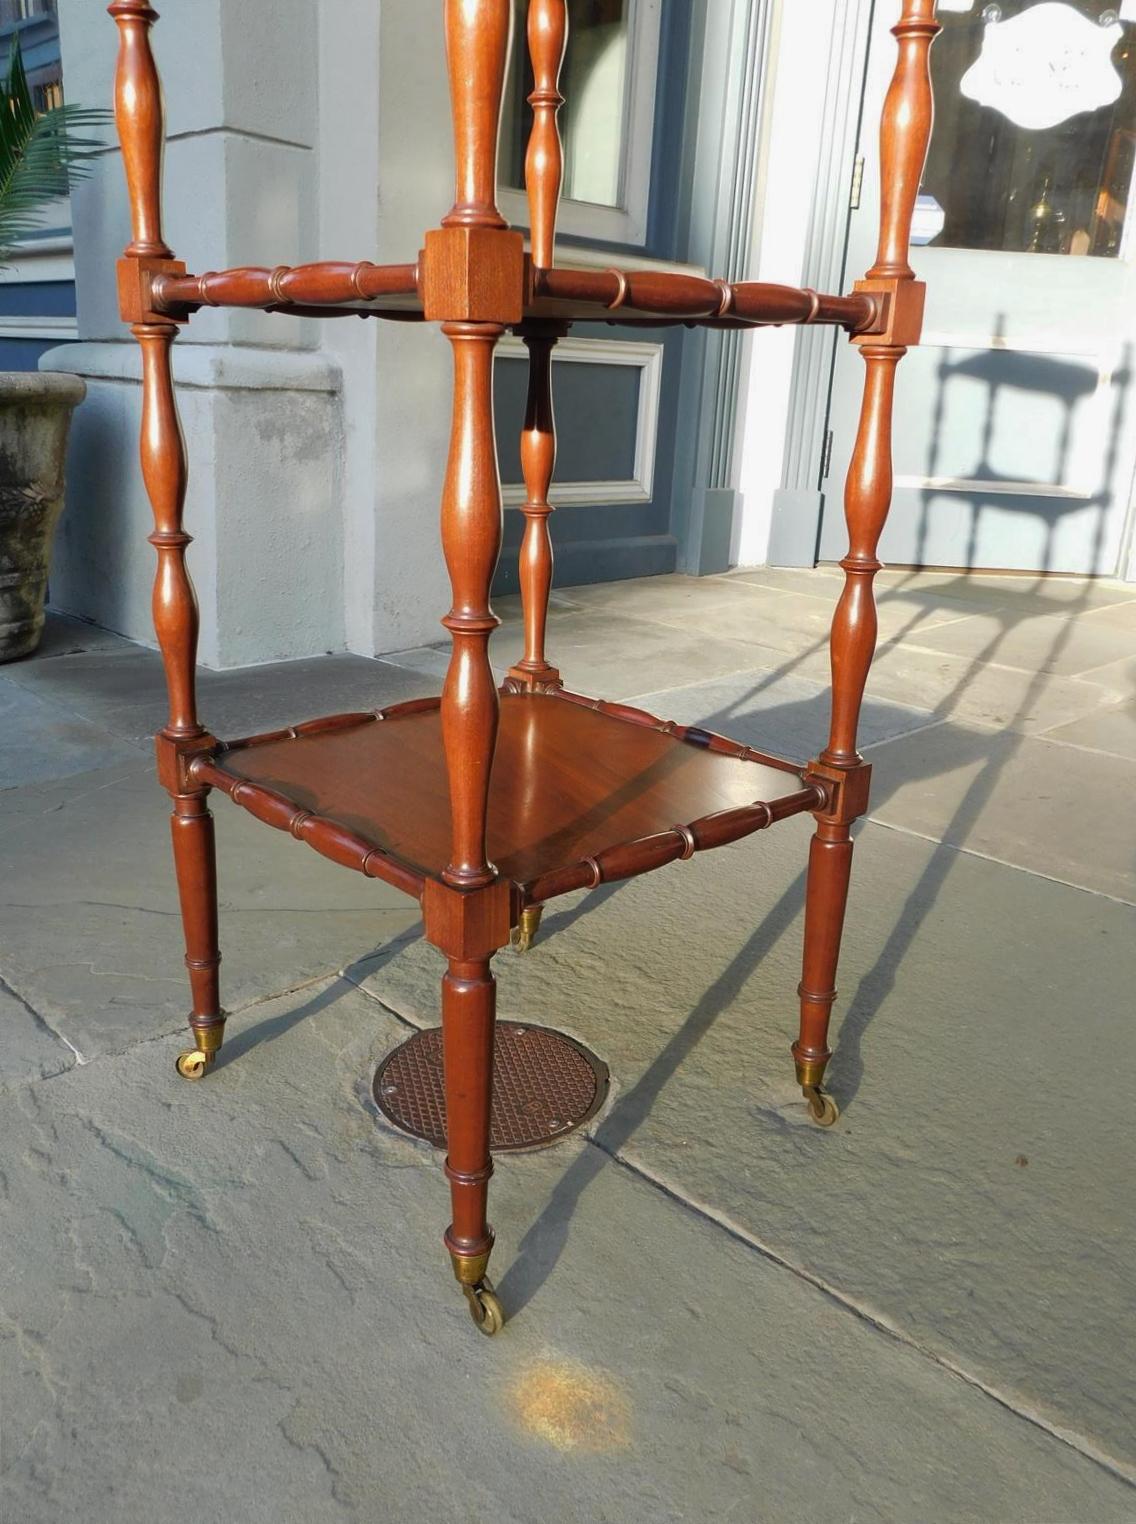 English Regency Mahogany Four Tiered Finial Etagere with Brass Casters, C. 1800 For Sale 2